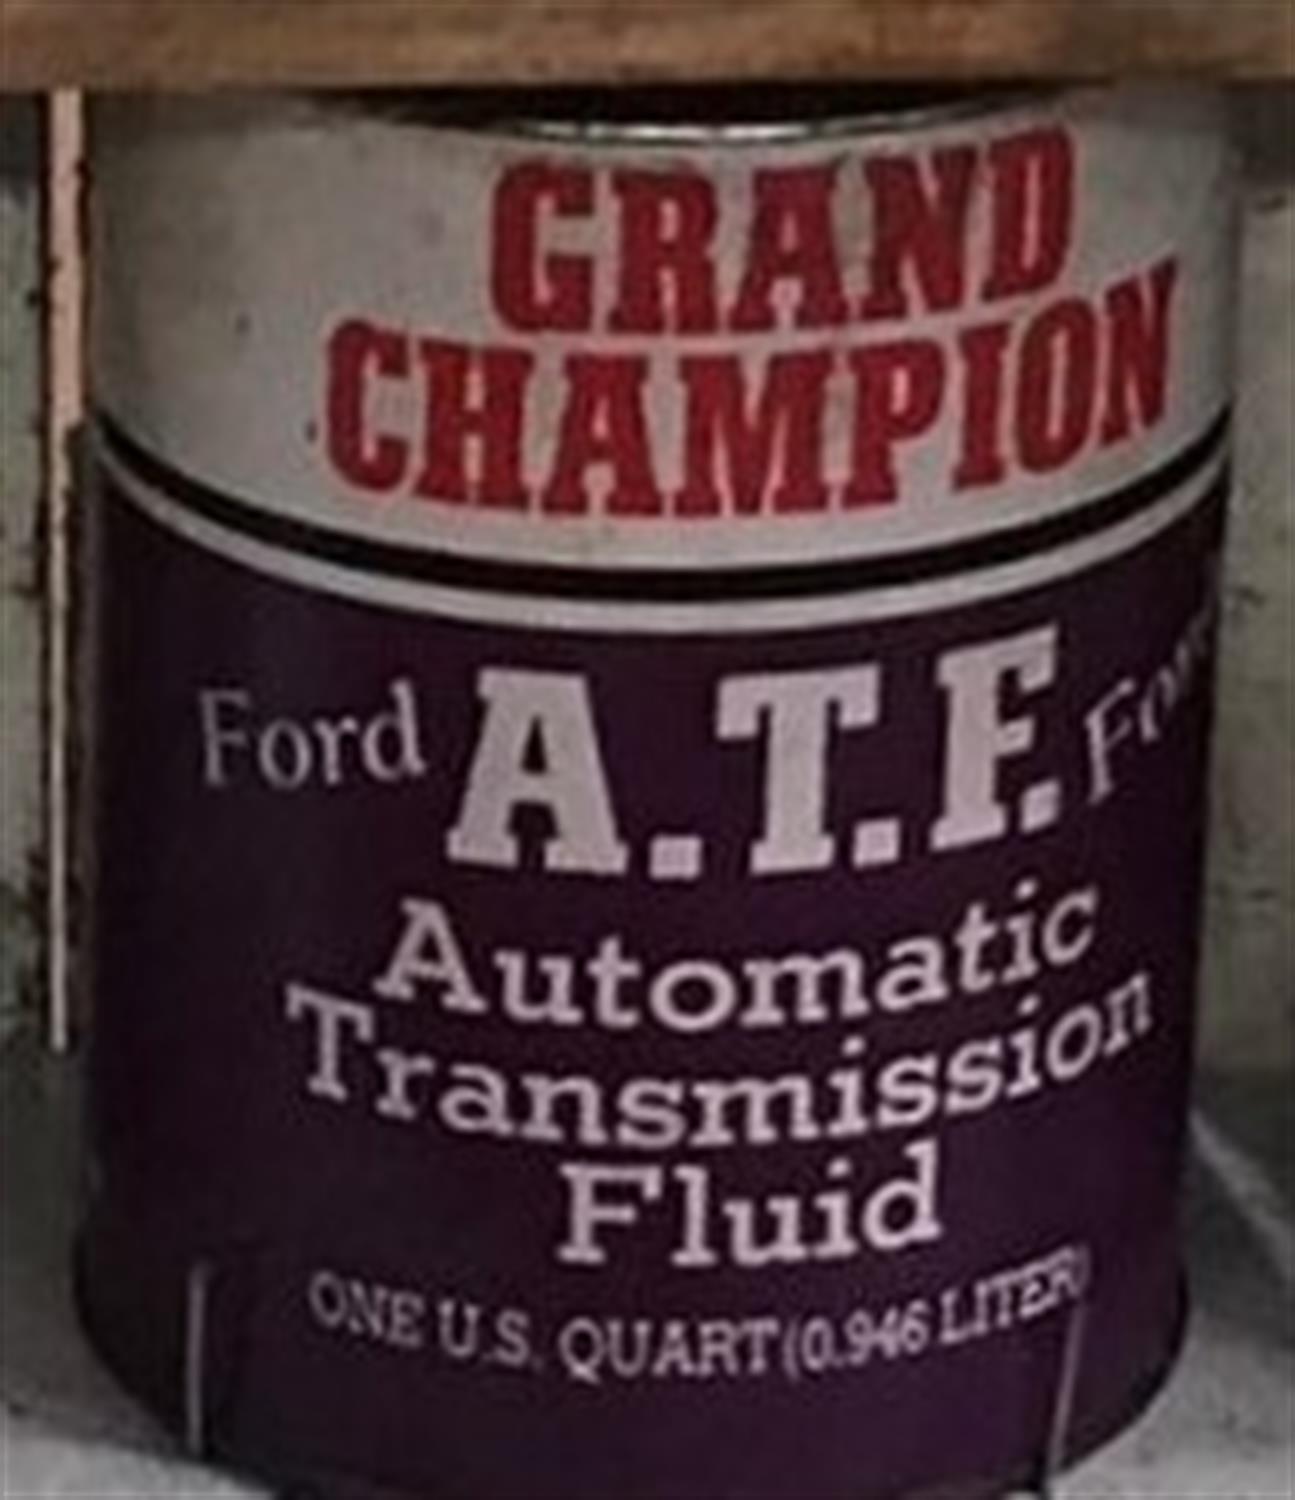 Set of 9 US-Quart Oil and Fluid Cans - Image 6 of 10